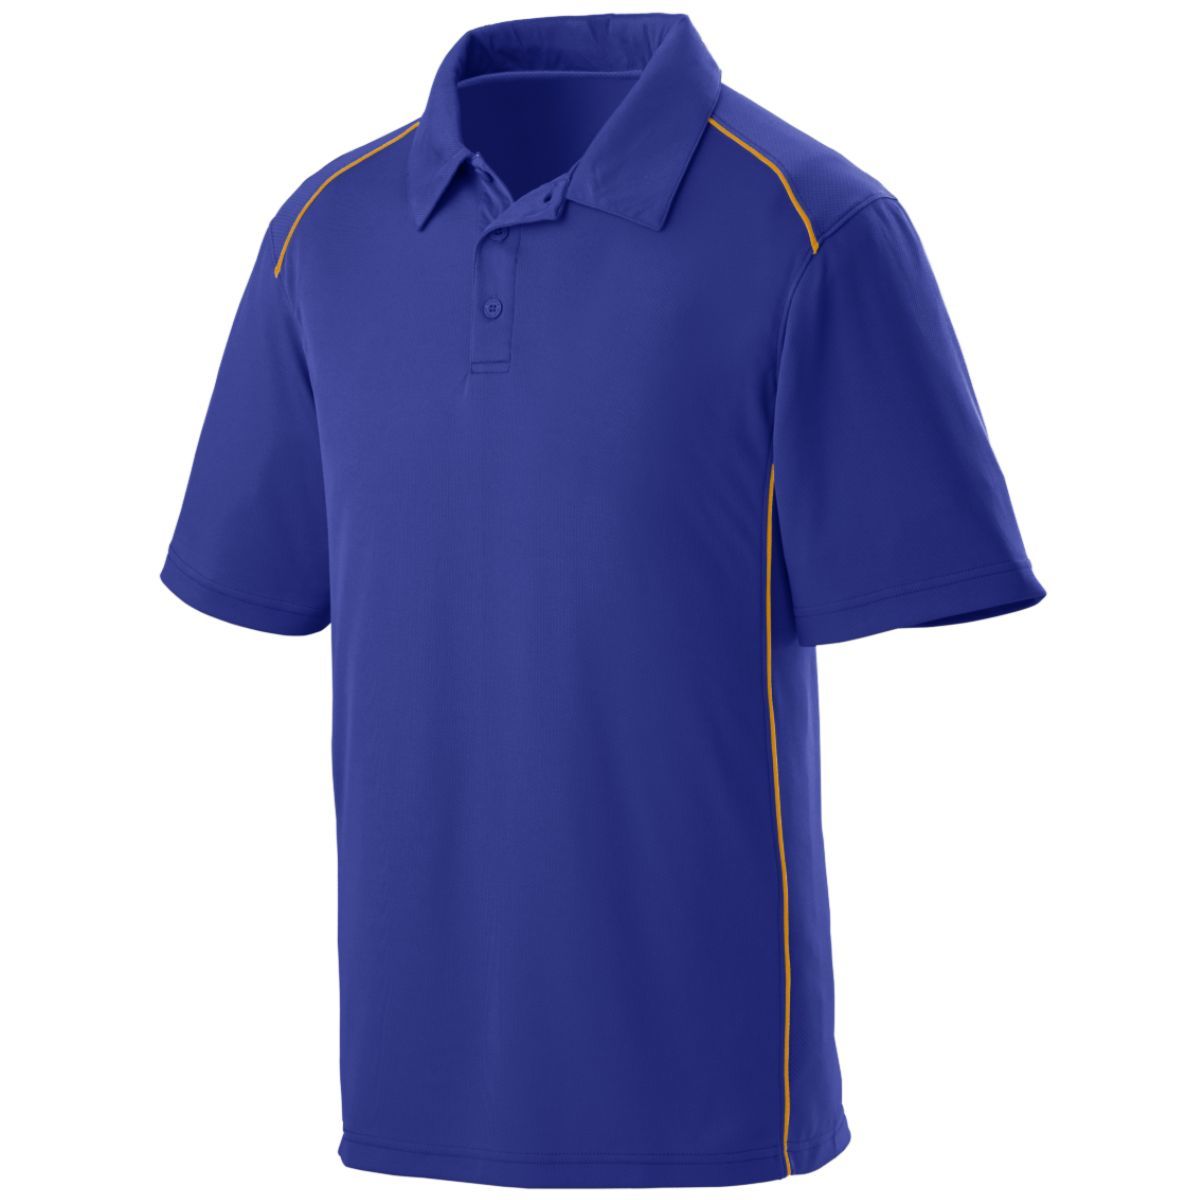 Augusta Sportswear Winning Streak Polo in Purple/Gold  -Part of the Adult, Adult-Polos, Polos, Augusta-Products, Shirts product lines at KanaleyCreations.com